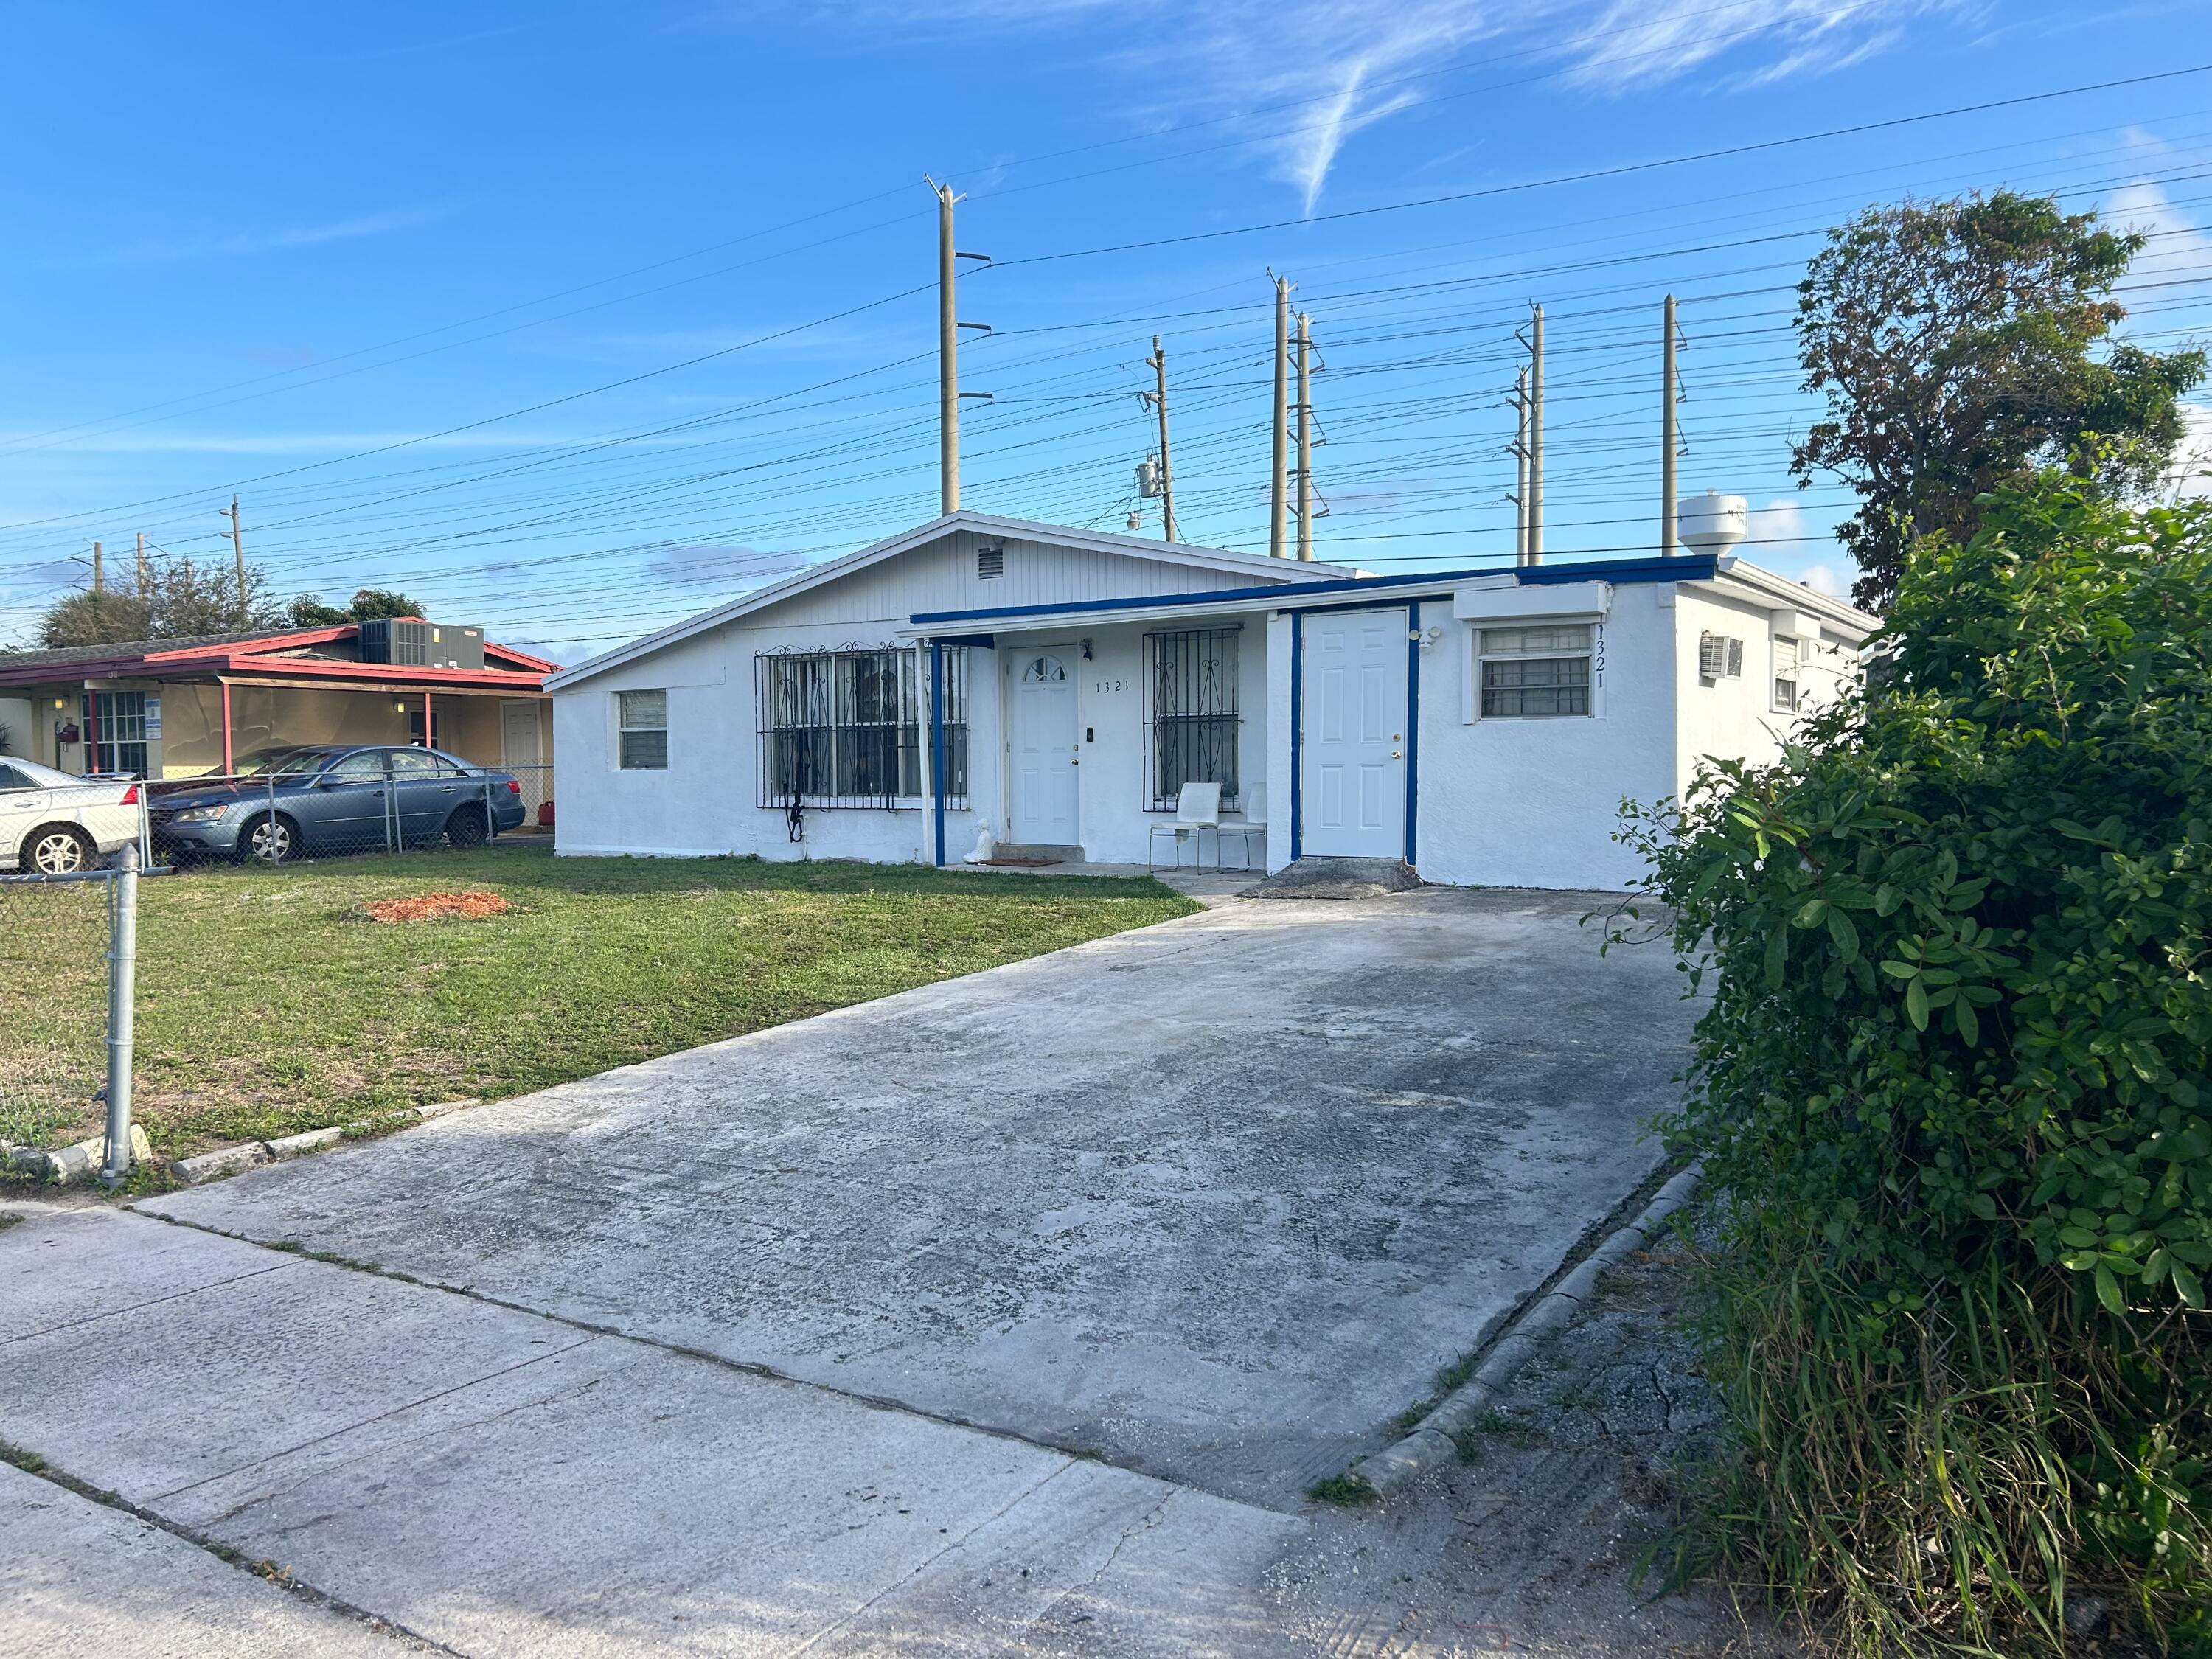 This meticulously maintained 4 bedroom, 2 bathroom residence offers the perfect blend of comfort and style in the desirable Riviera Beach, Florida.